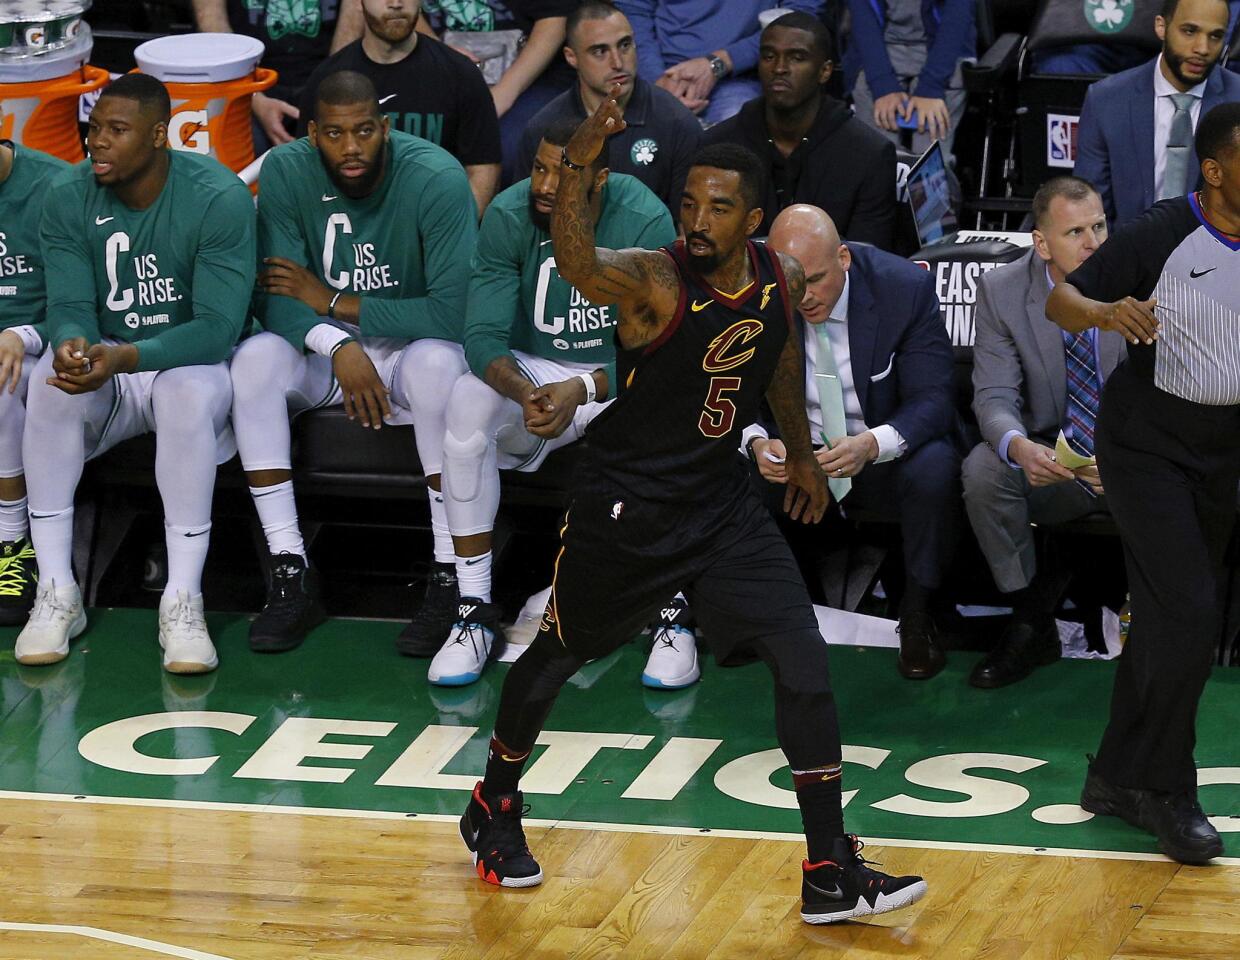 Cleveland Cavaliers guard JR Smith (C) celebrates a three point shot during the third quarter of the Eastern Conference Finals playoff game seven between the Boston Celtics and the Cleveland Cavaliers at the TD Garden in Boston, Massachusetts, USA 27 May 2018. The best of seven series is tied 3-3.